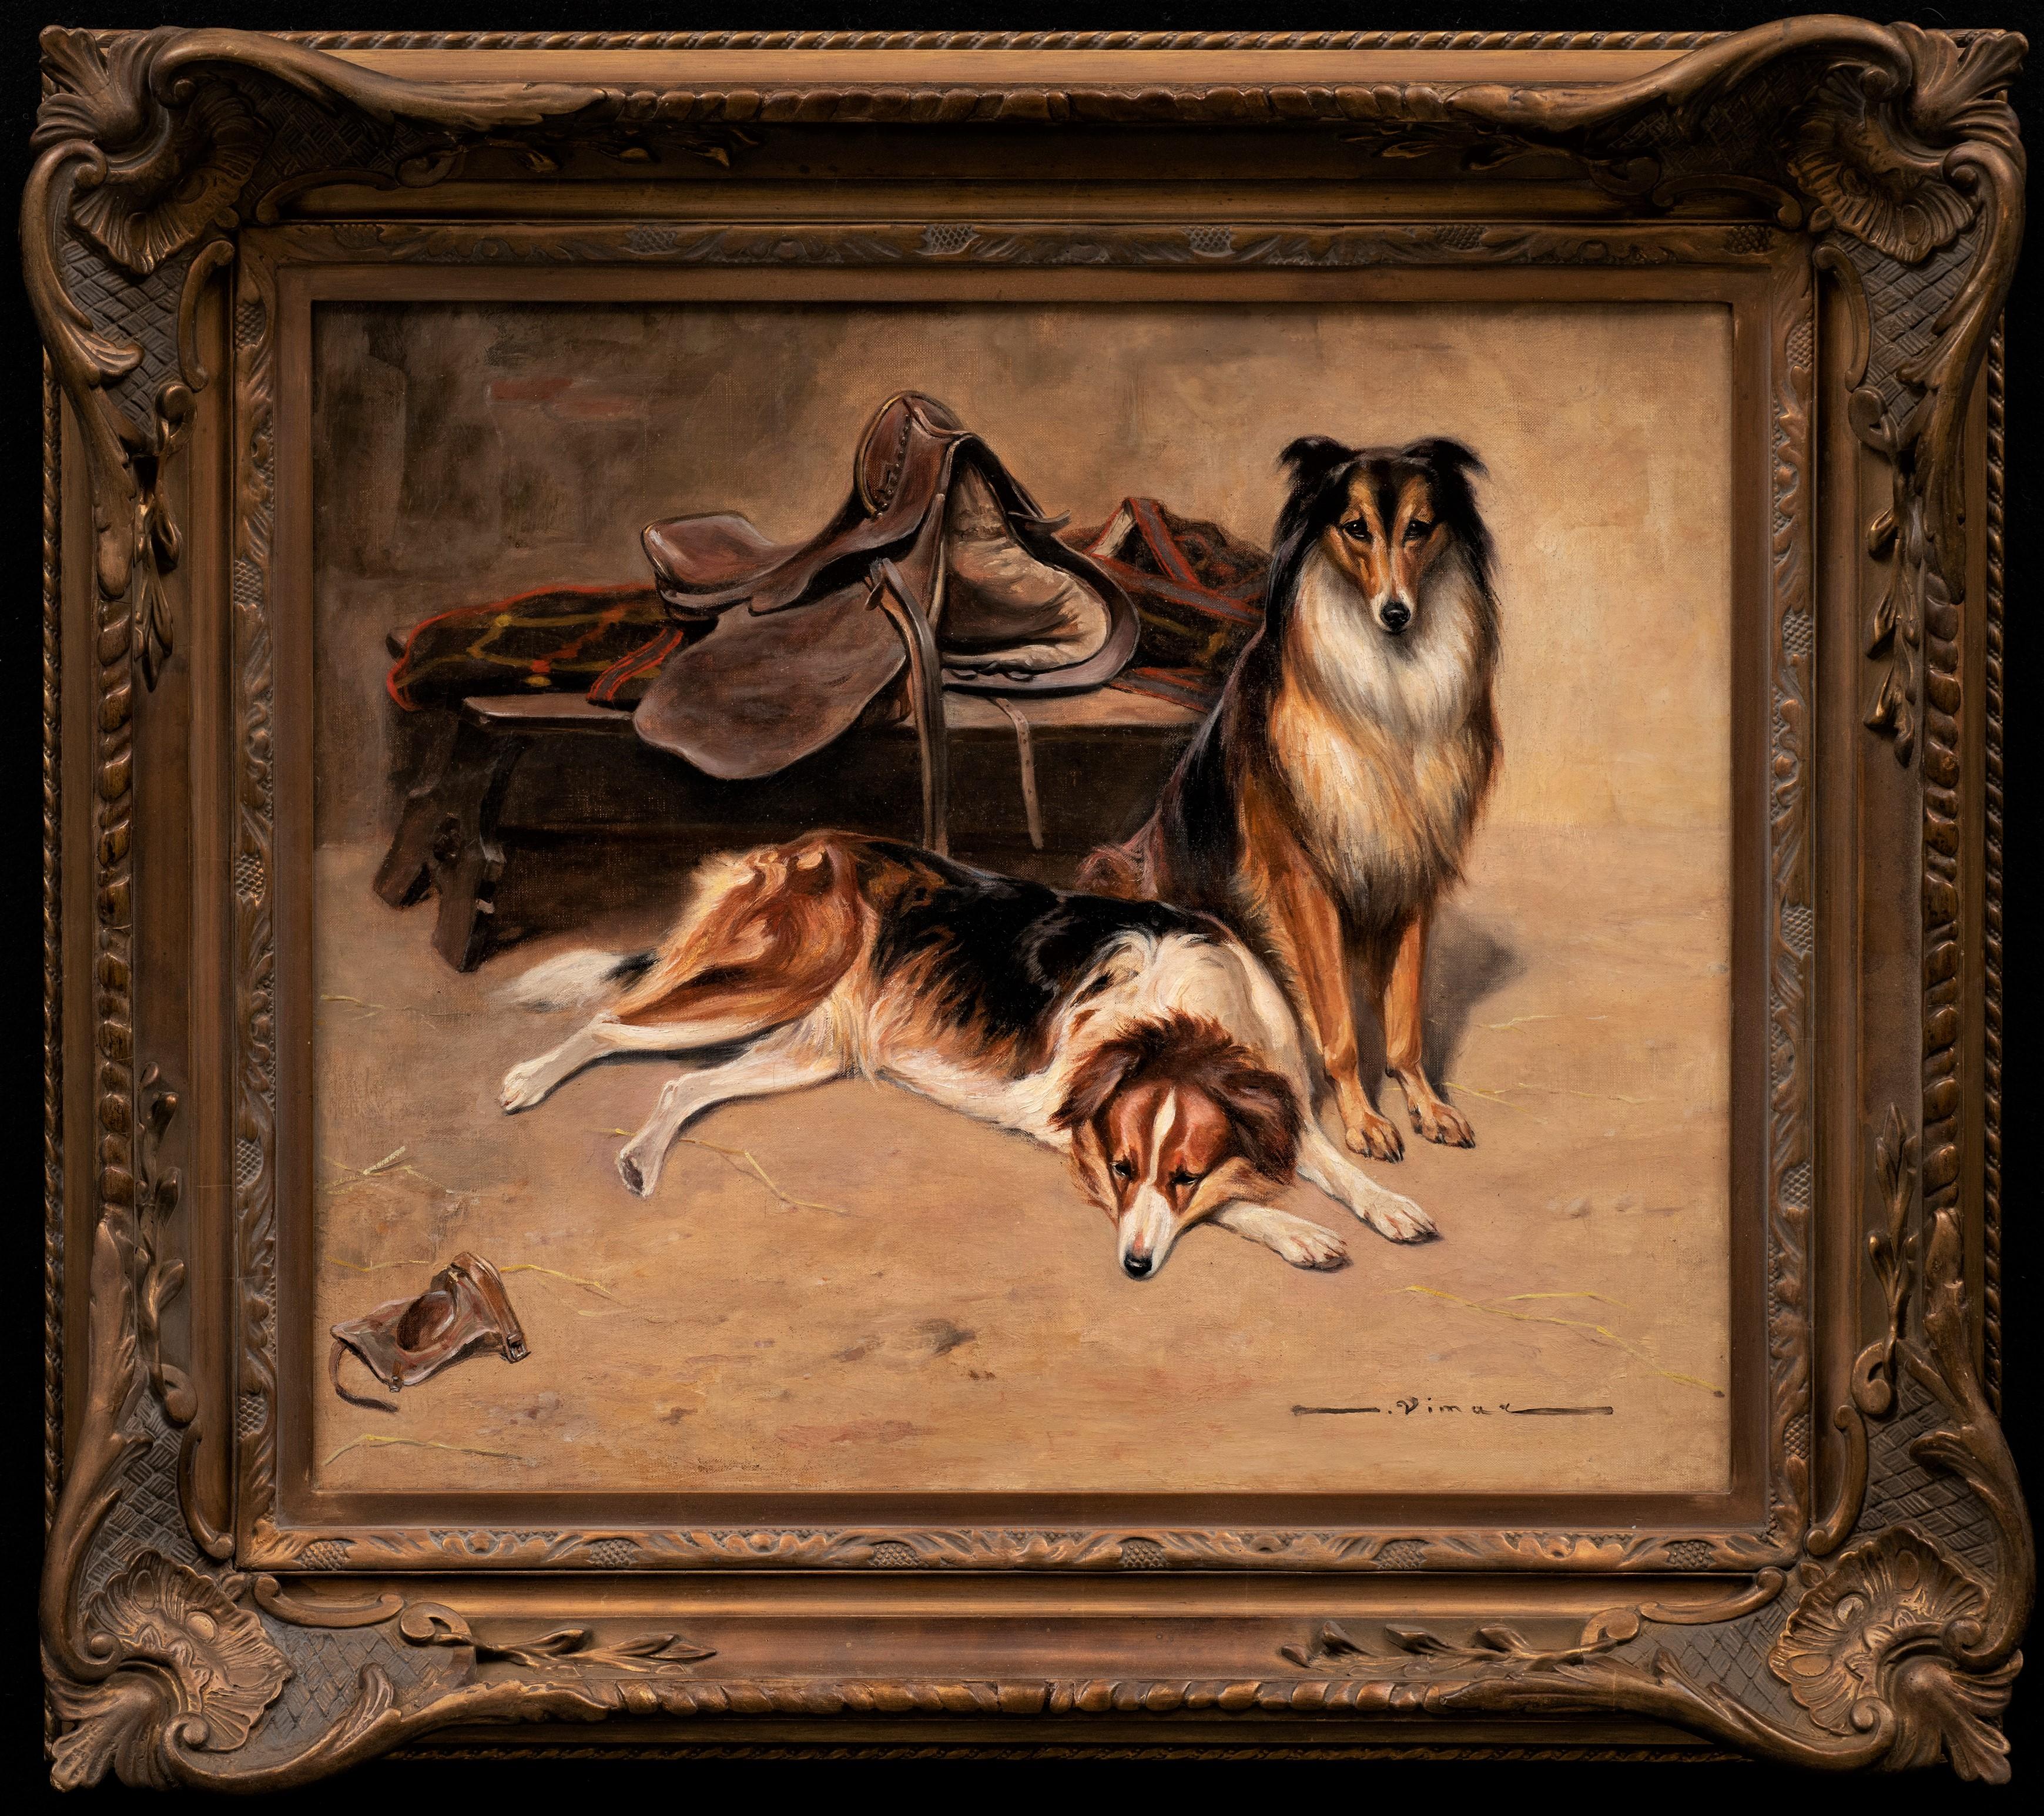 Antique Dog Painting Collies in Horse Stable w/ Saddle and Blanket, 19th century